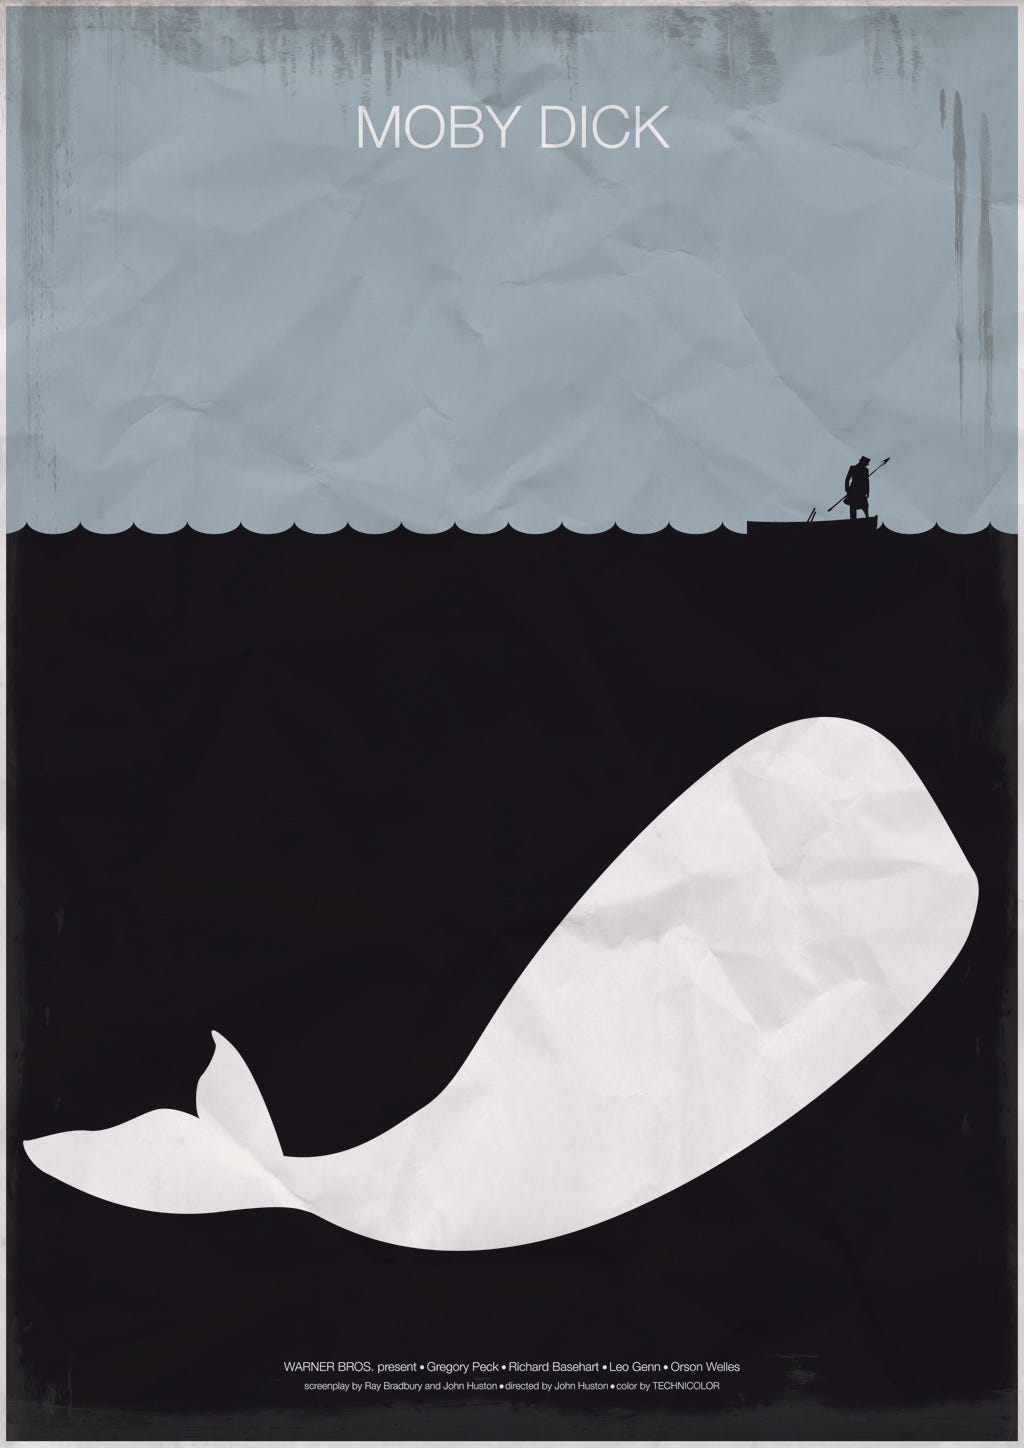 Moby Dick is Not a Novel. An Anatomy of an Anatomy, by Jacob Shamsian